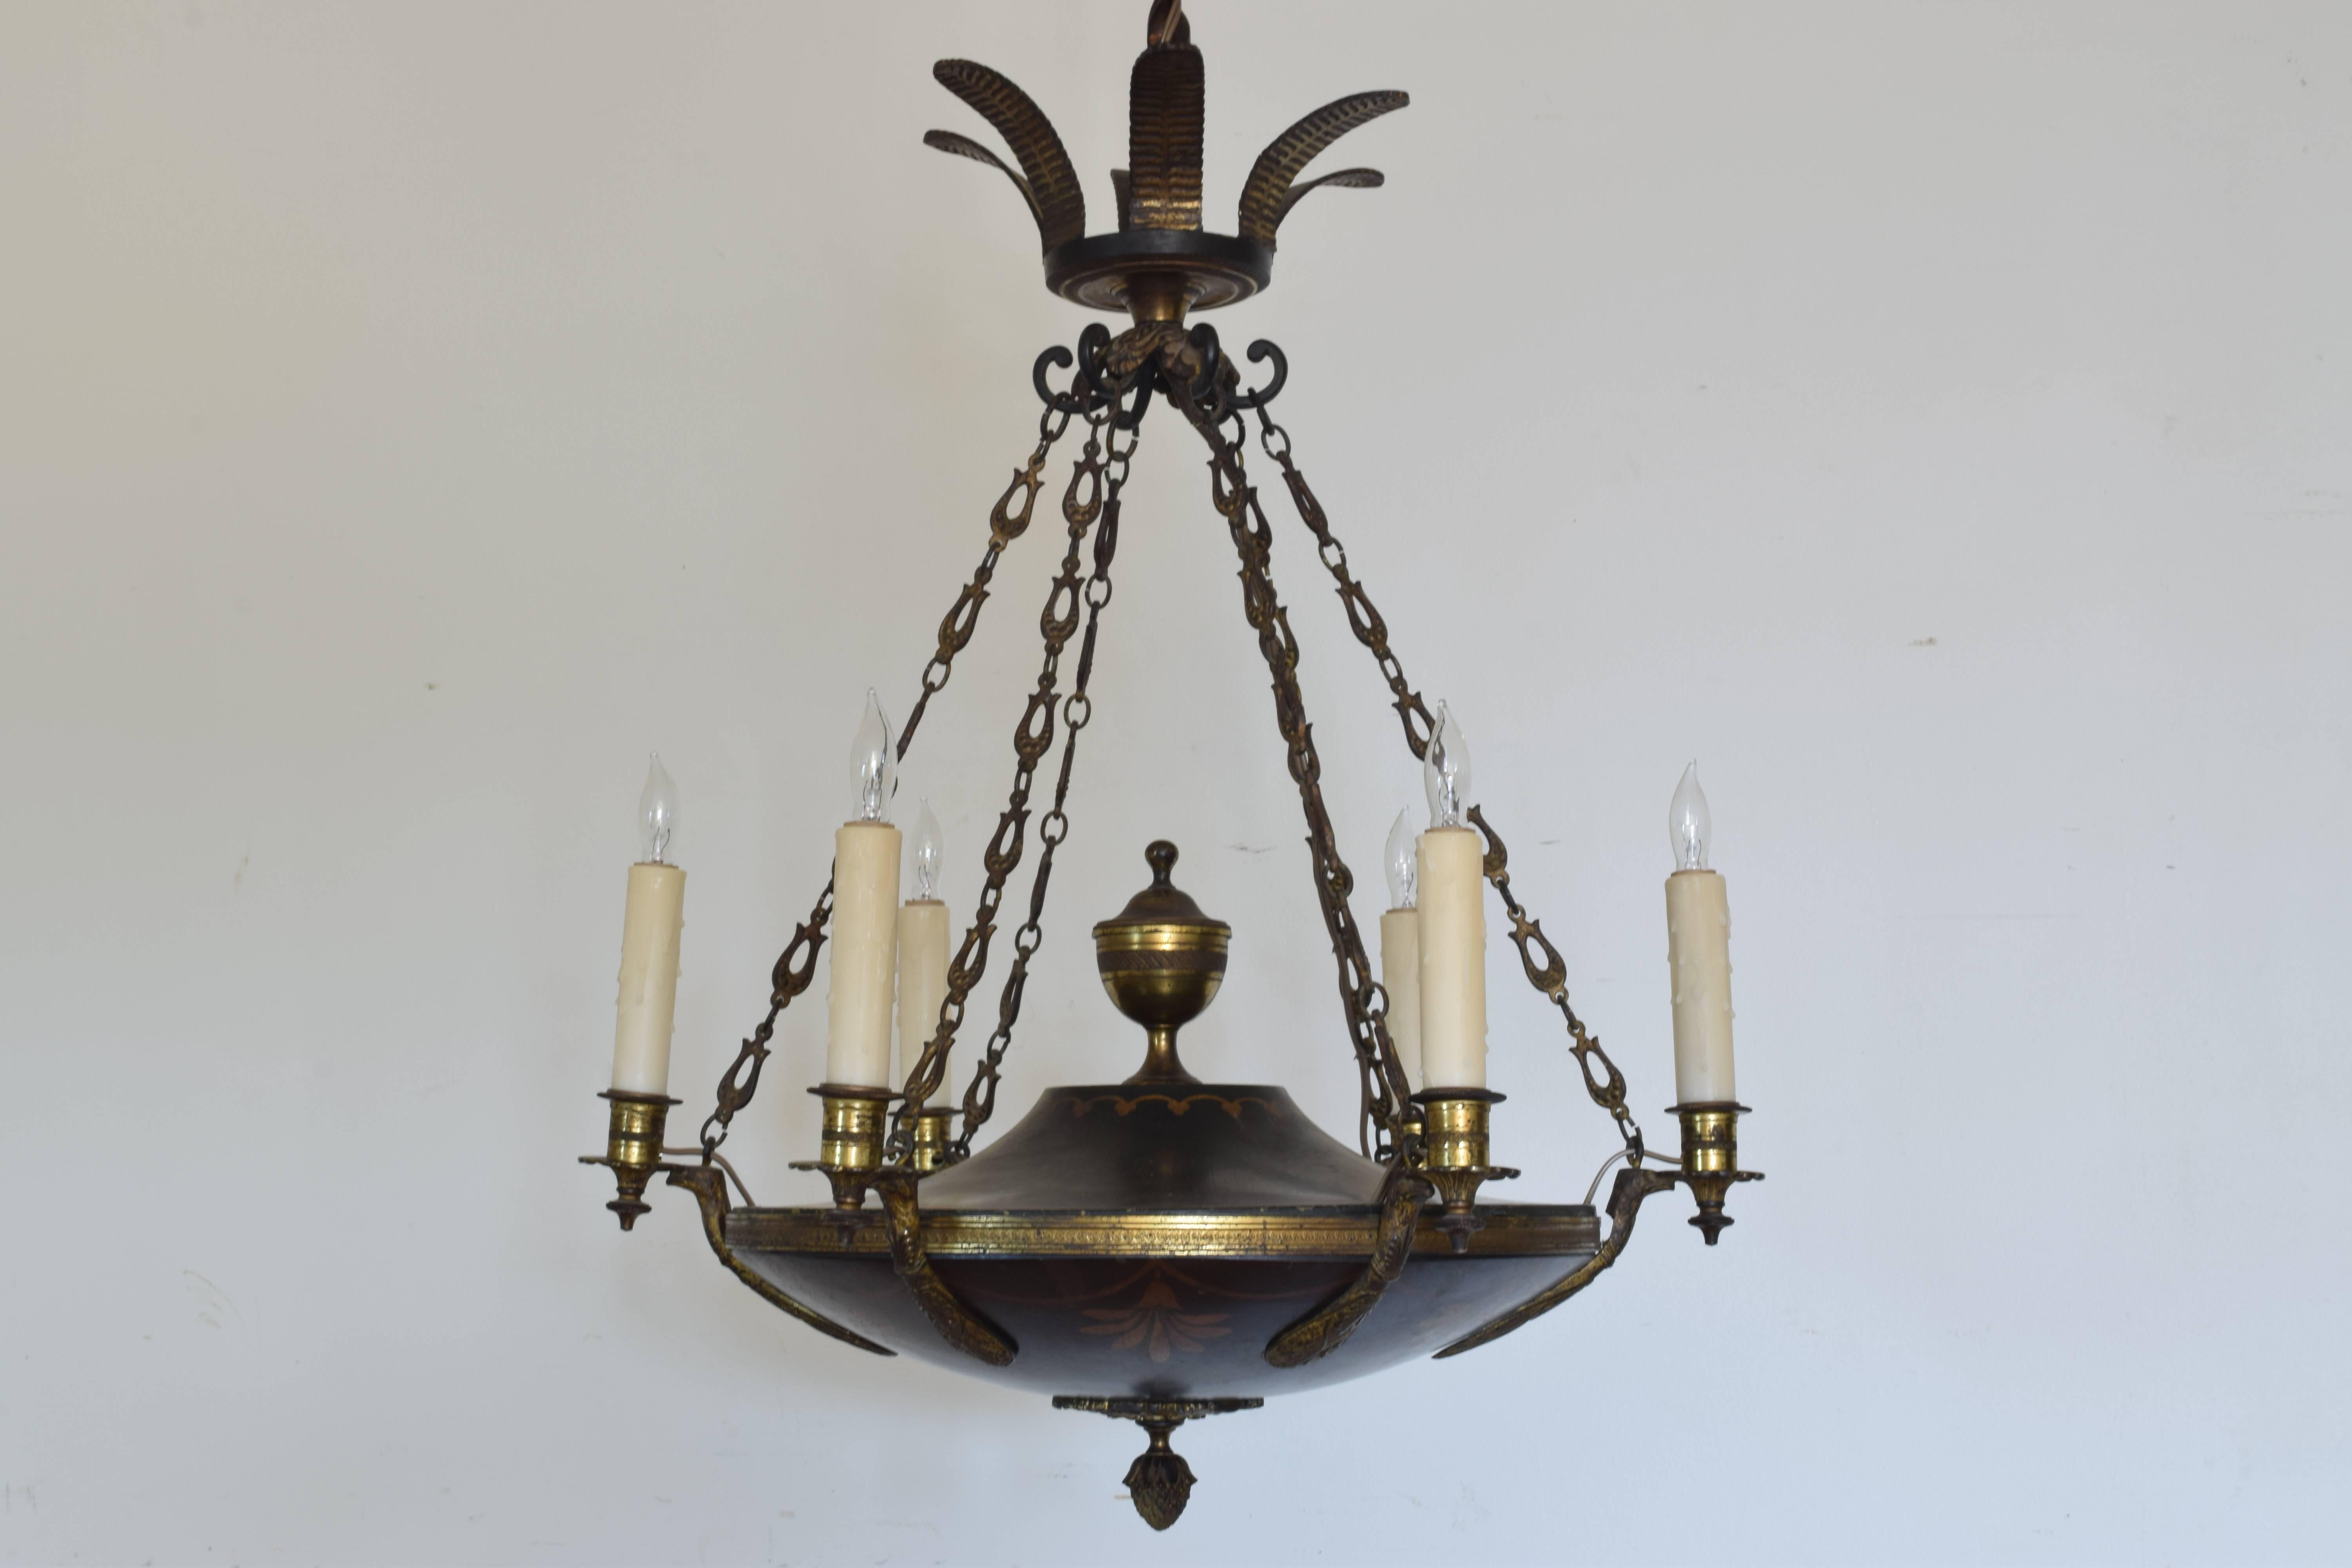 Cast, painted and gilded metal in the Empire style. The main body a flattened urn, painted and with gilt decoration, issuing six cast brass arms. Hanging from original chain and leaf-form canopy.  UL wired.